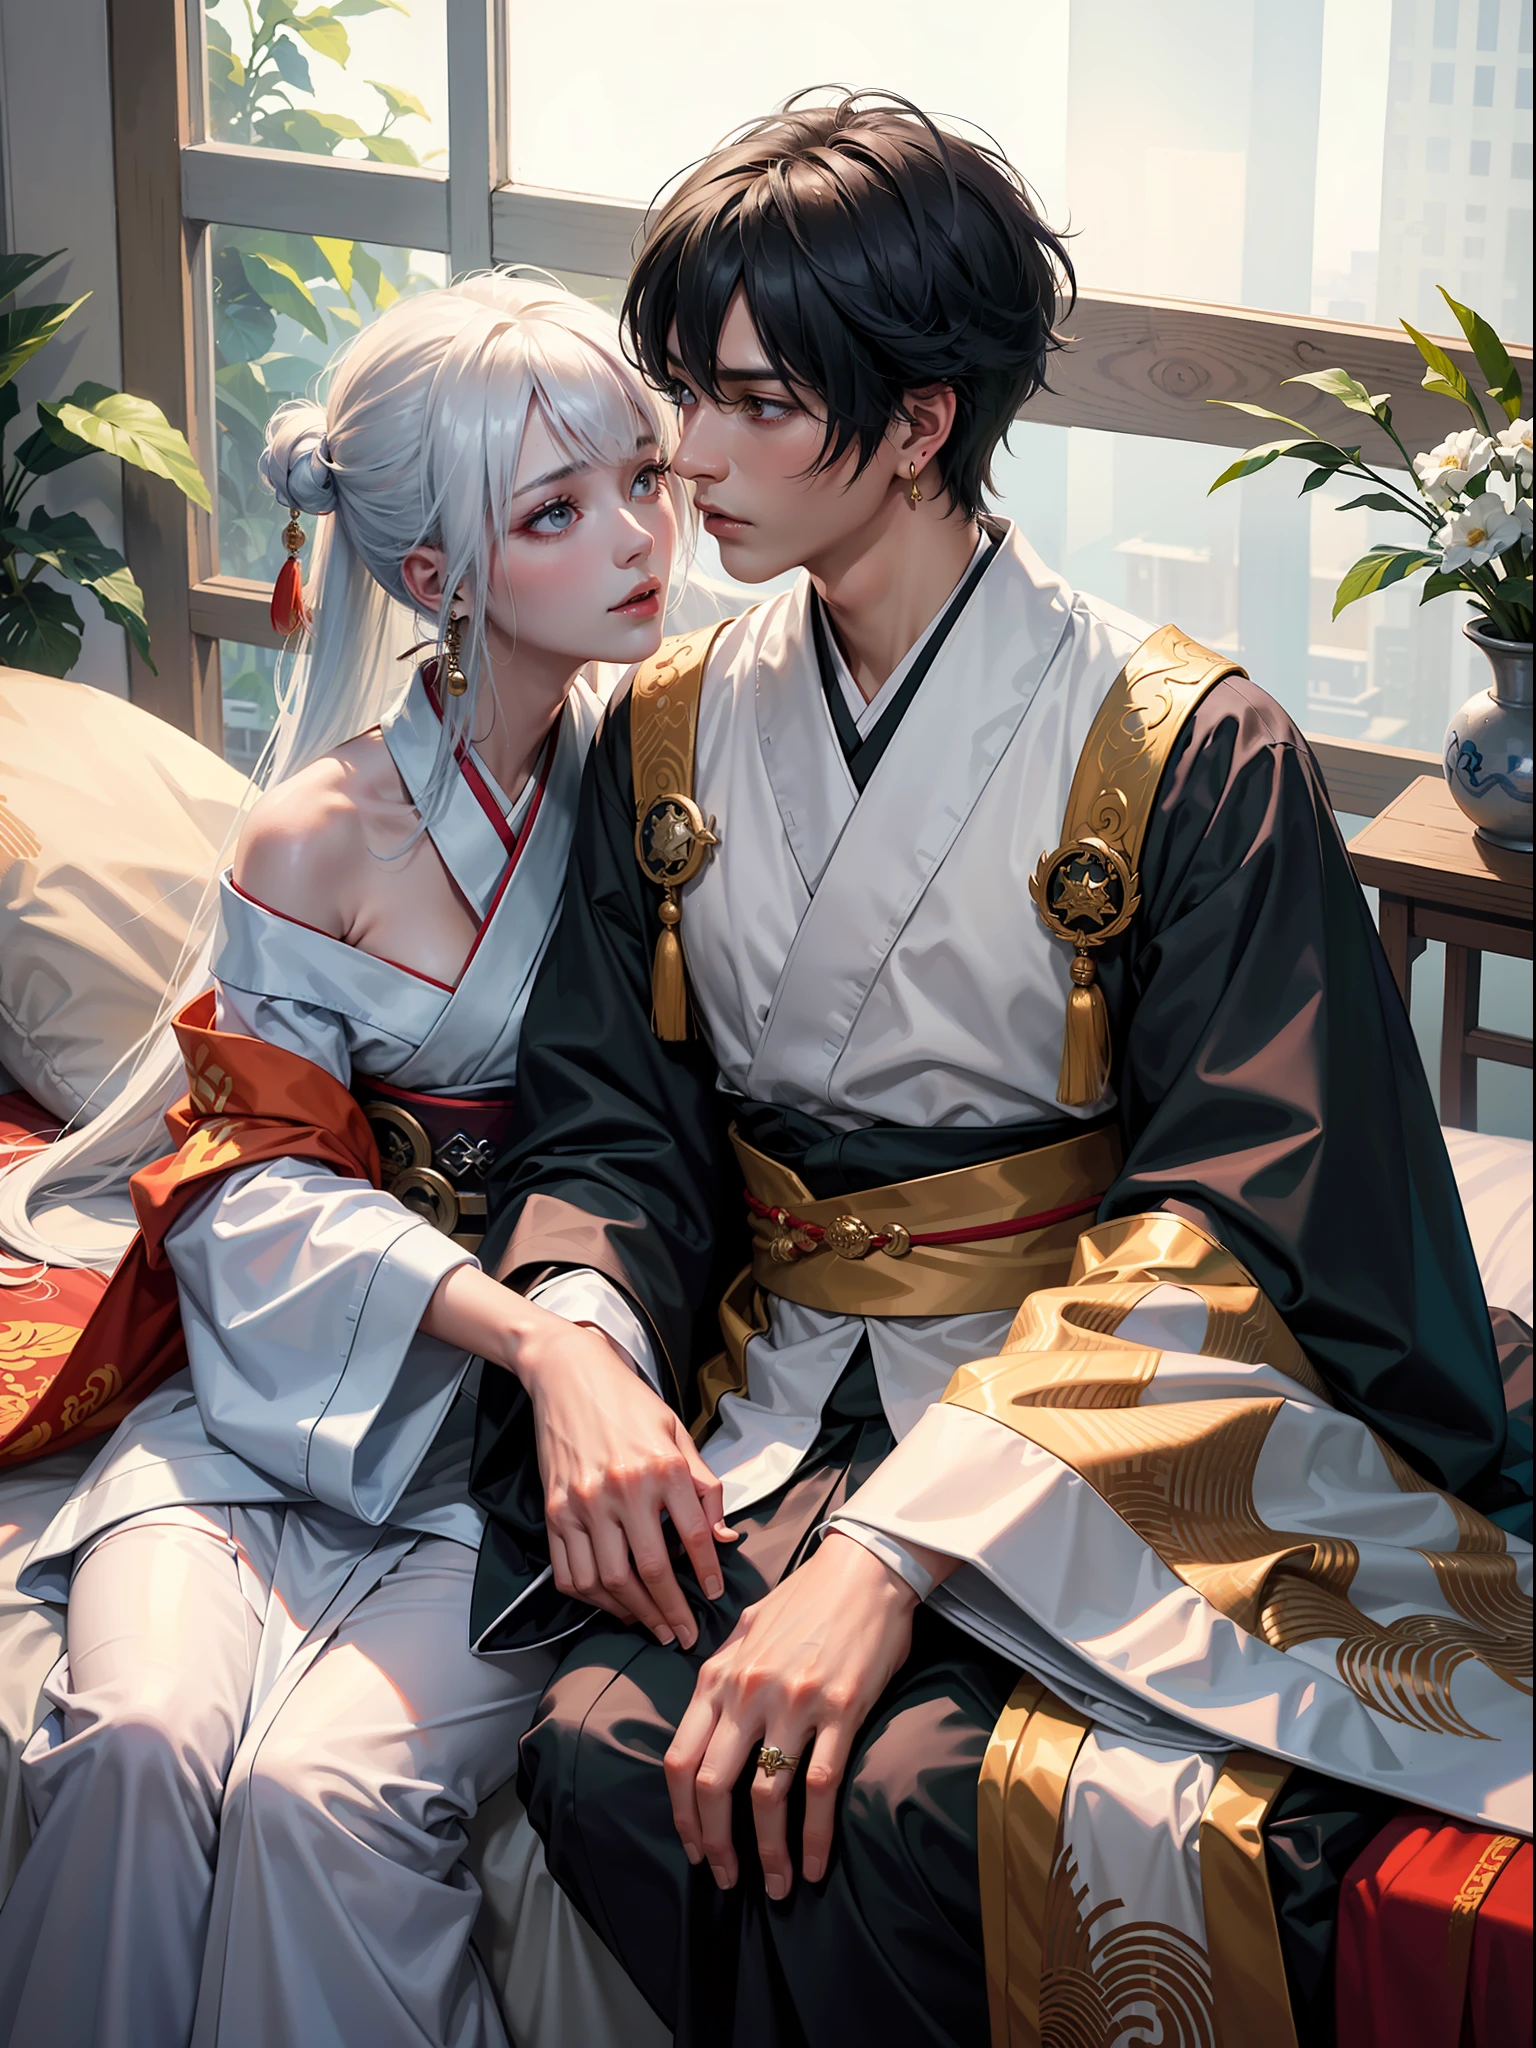 Concept Art, "1 Couple, Male Focus, Fin Ears, Multicolored Hair, Handsome Boy, Long White Hair, Tassels, Bangs, Carp, Colorful, Bold Colors, White Kimono, (Open) Kimono, Traditional Chinese Clothing, Close-up, Intimate Interaction in Bed, Stud Earrings, Rings, Sweat, Illuminate People", Colorful, Master Composition, Focus on Key Figures, Realism, Masterpiece, Award-Standing, Best Quality, Masterpiece, Ultra Detailed, 8K, Extremely Detailed CG Unity 8k wallpaper, complex, highly detailedrealistic